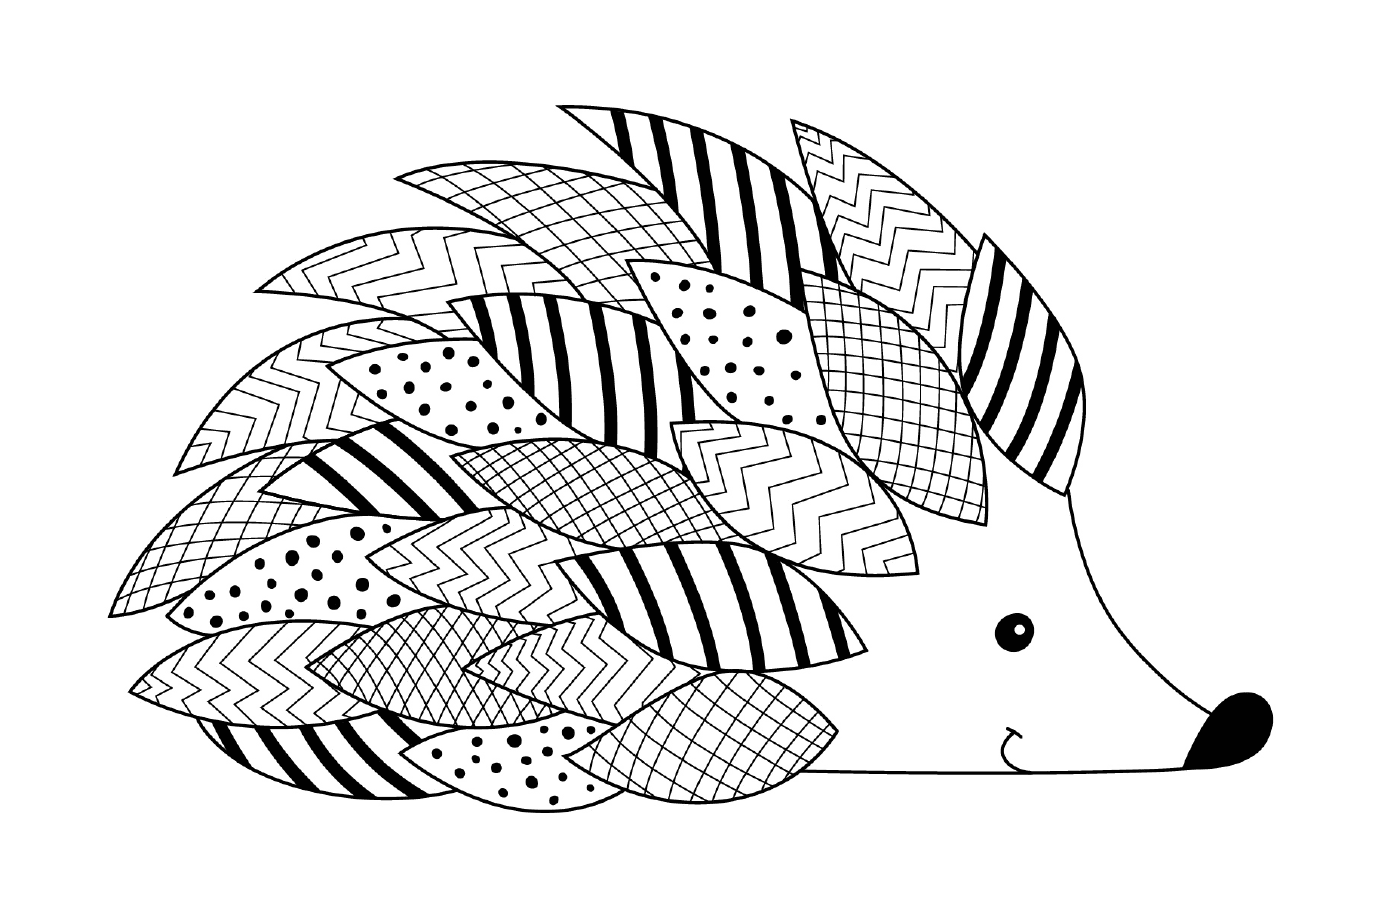  Hedgehog with many patterns 